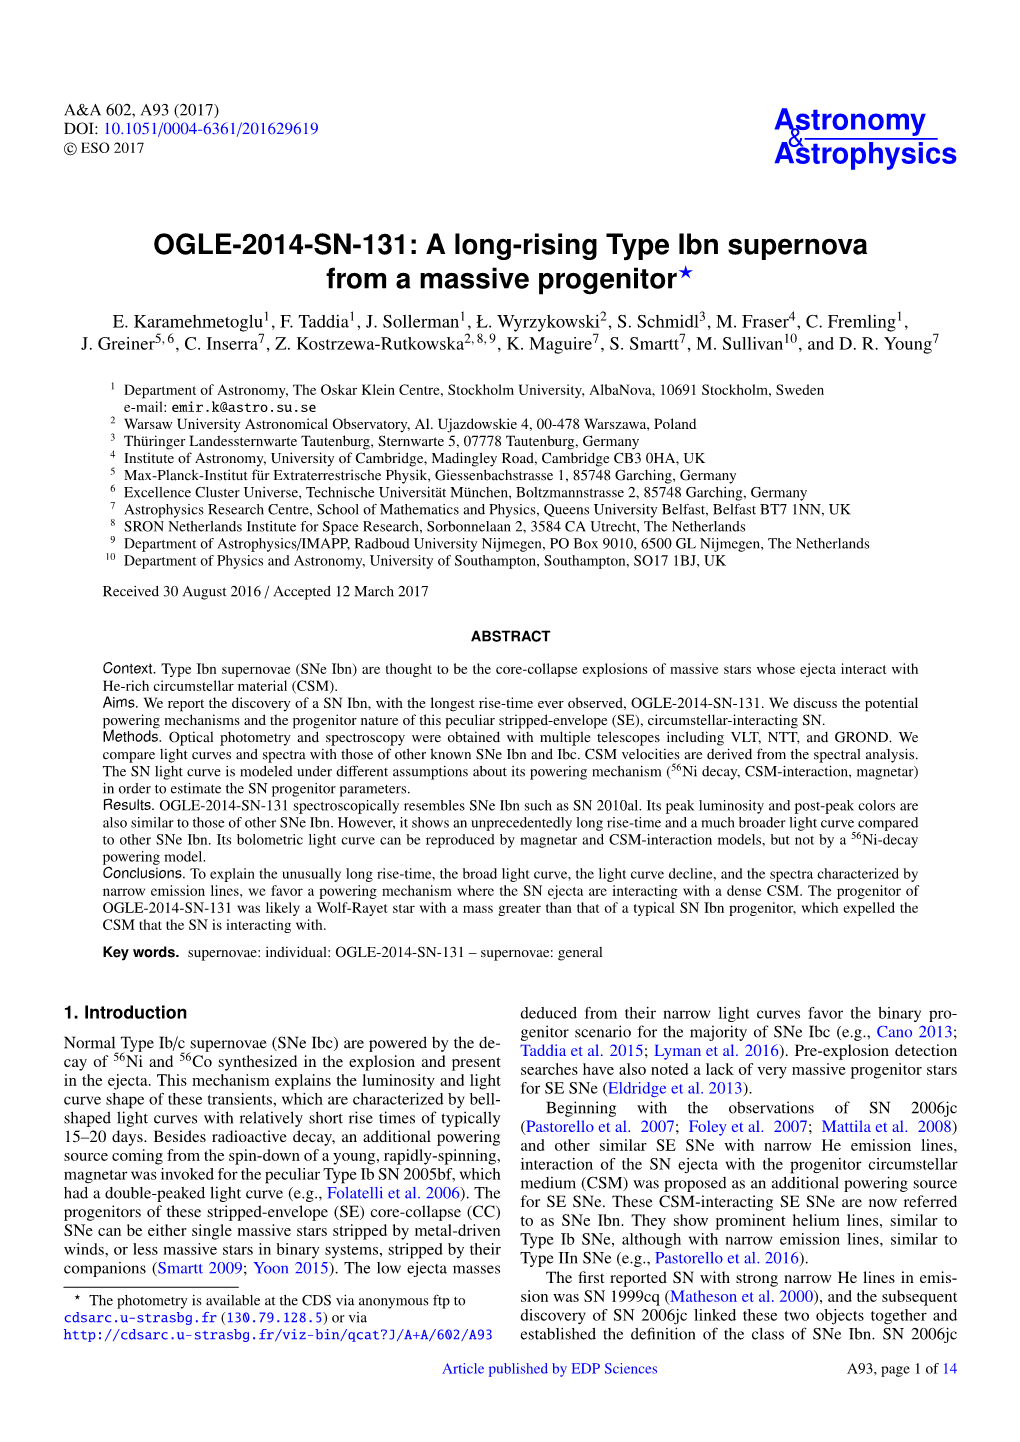 OGLE-2014-SN-131: a Long-Rising Type Ibn Supernova from a Massive Progenitor? E